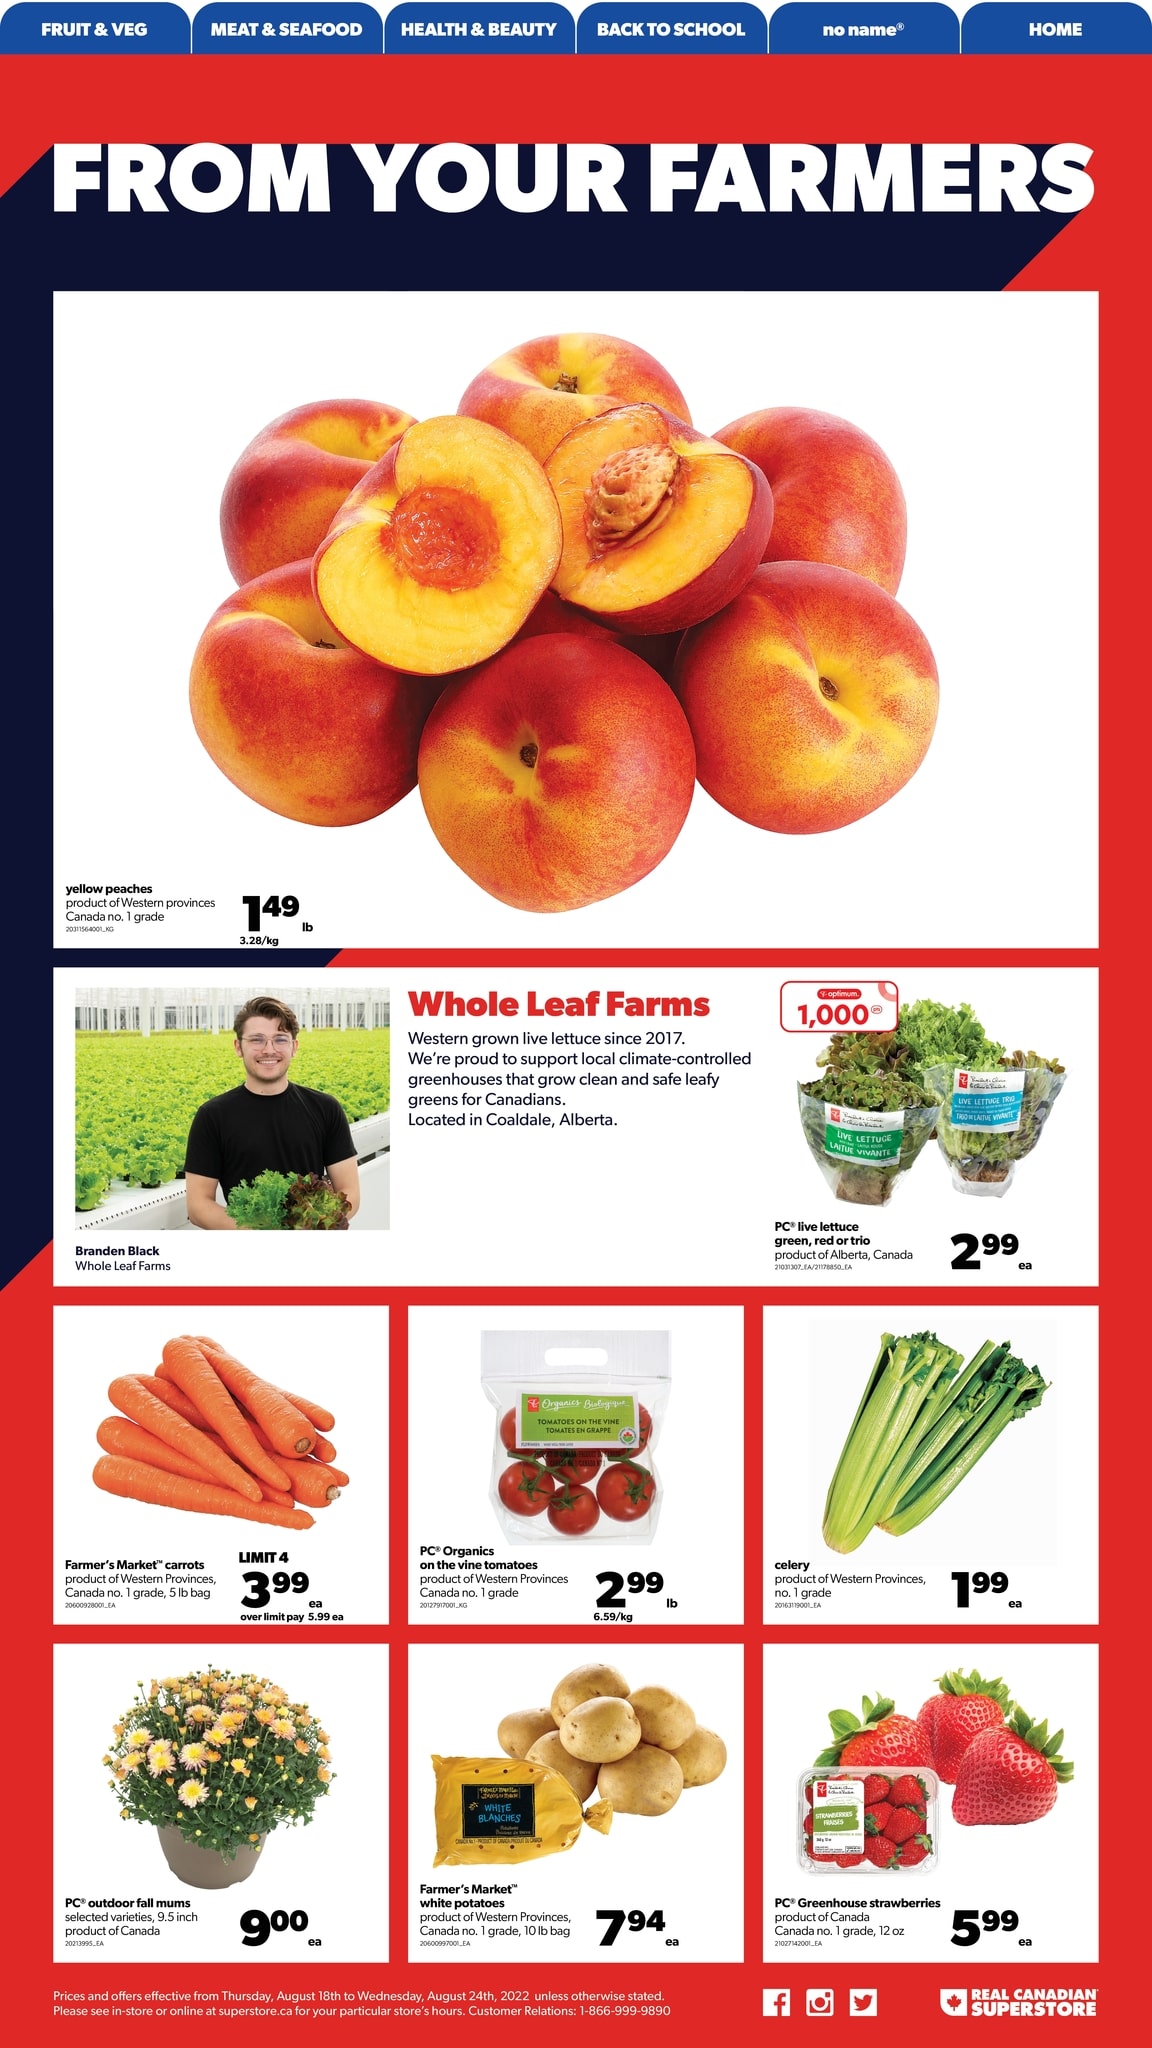 Real Canadian Superstore Western Canada - Weekly Flyer Specials - Page 2